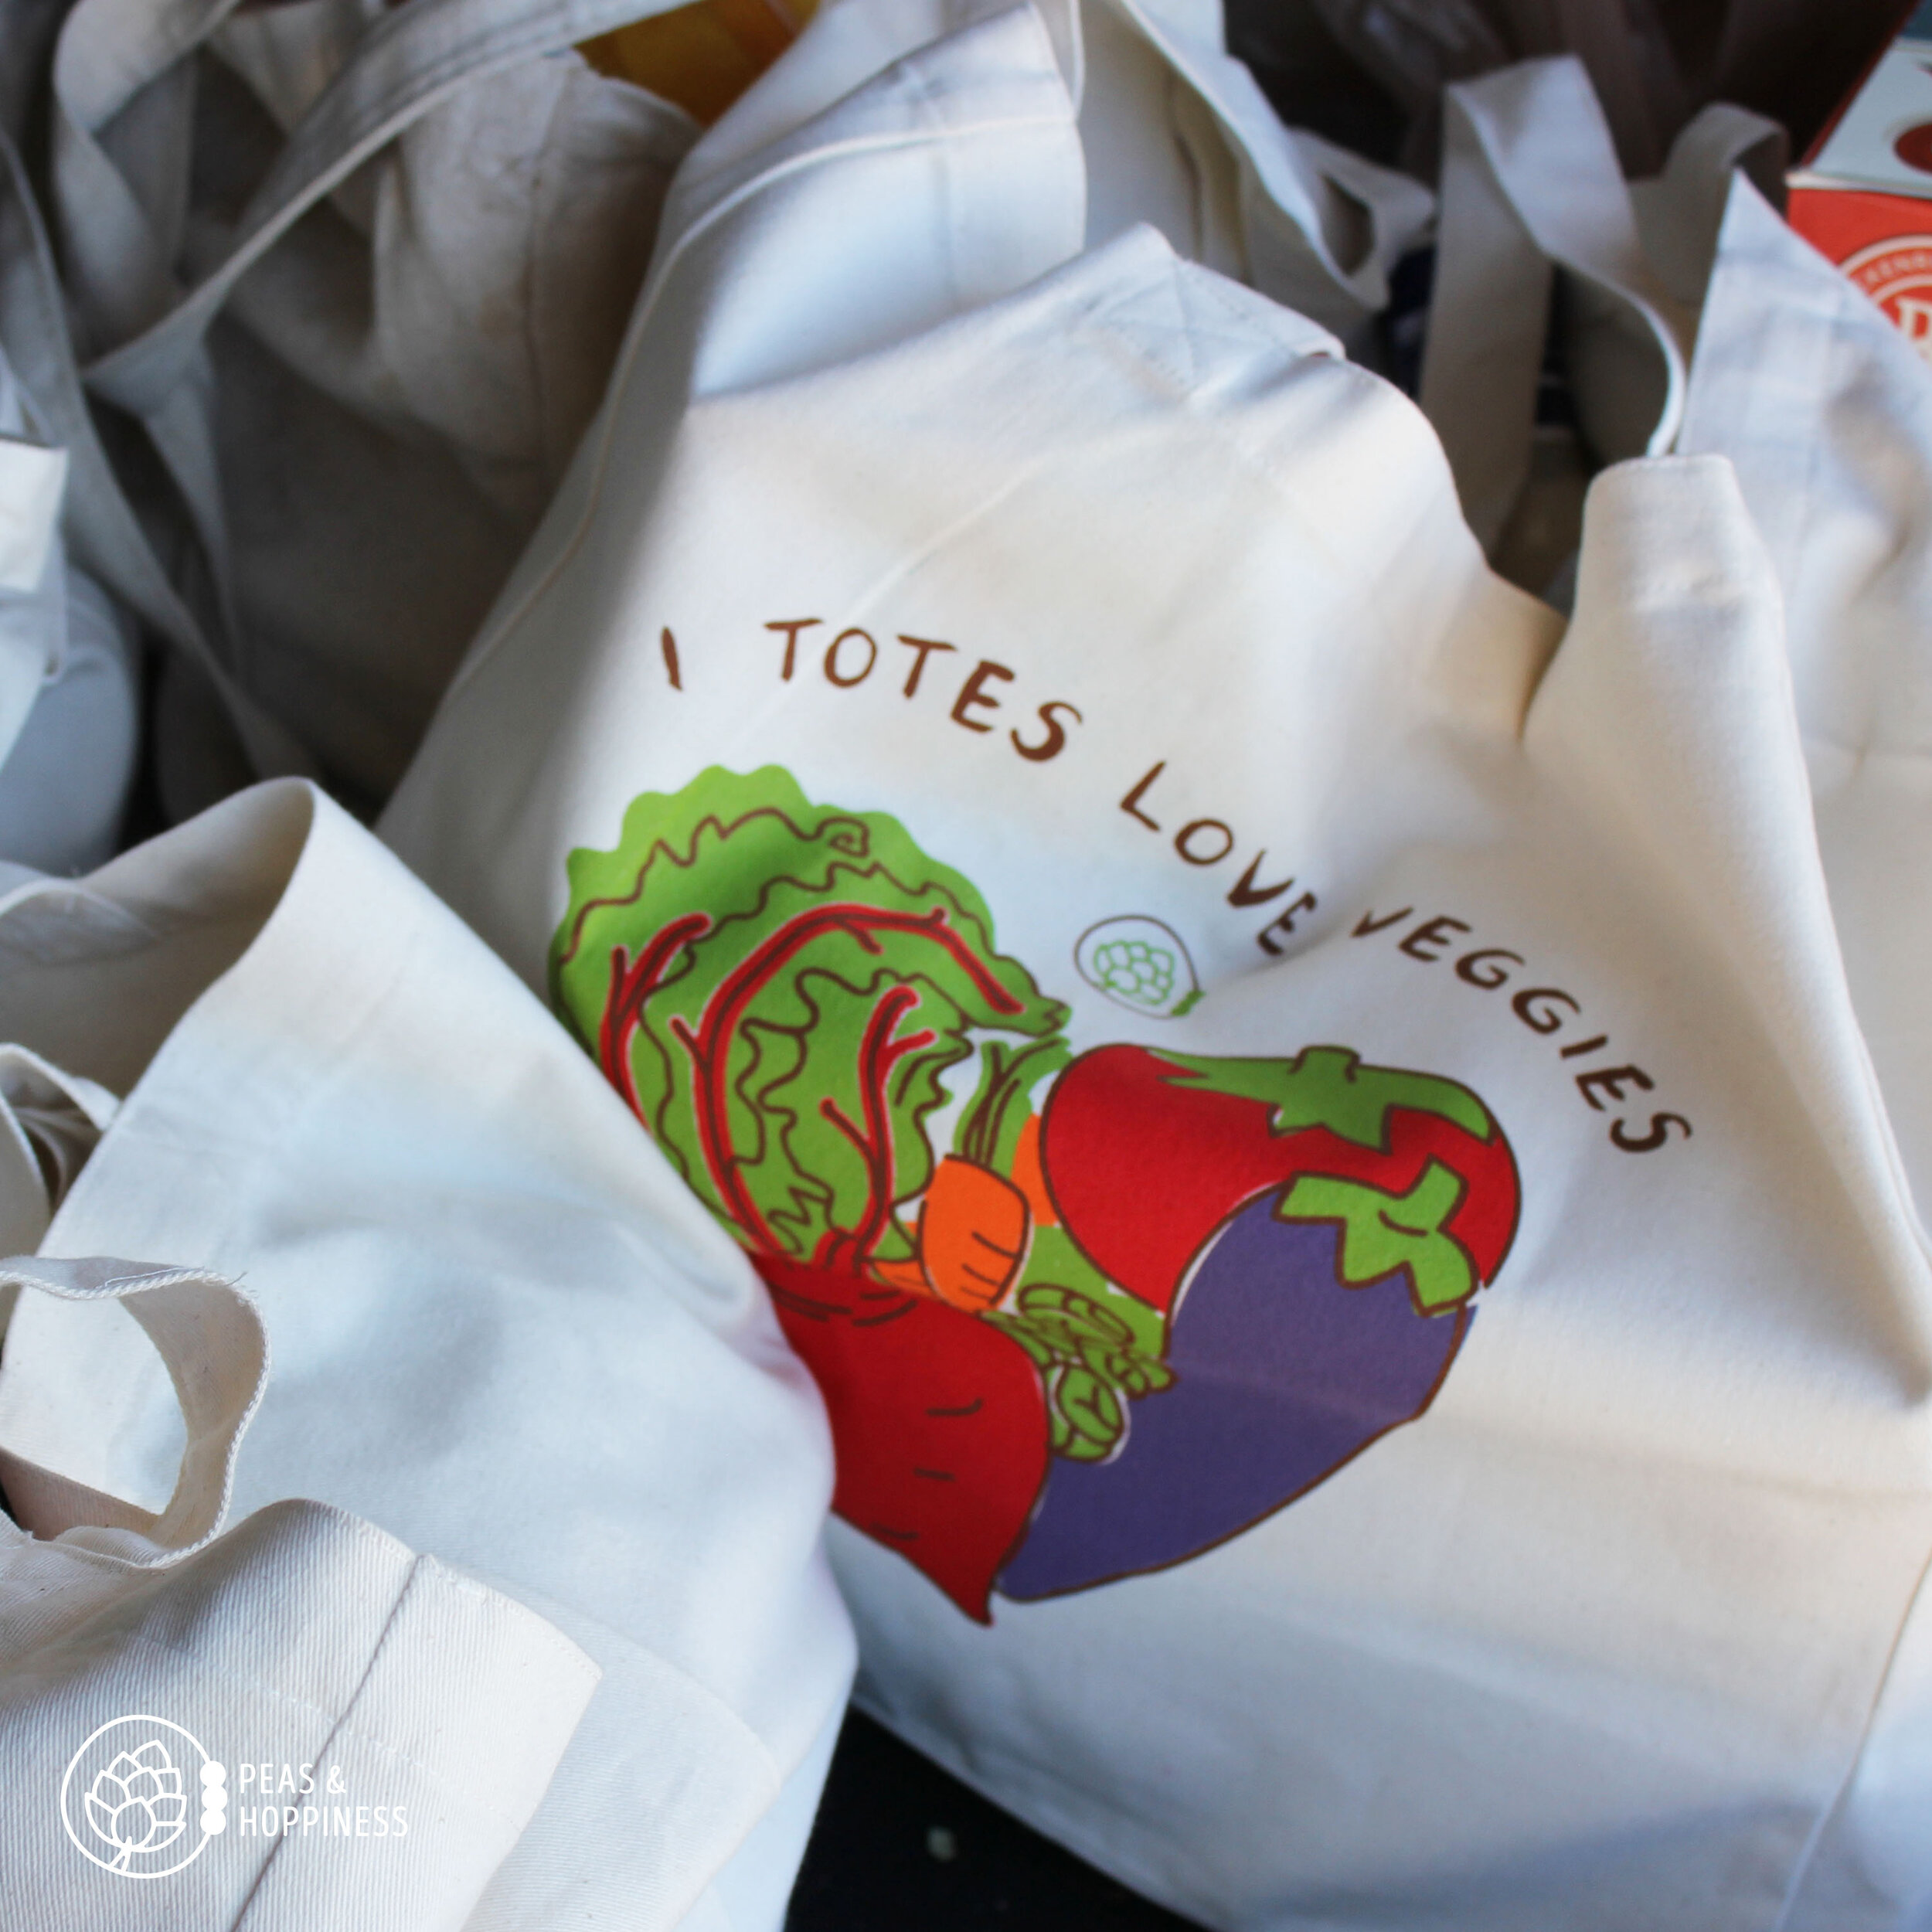 Don’t forget your reusable tote bag when you go to the store!